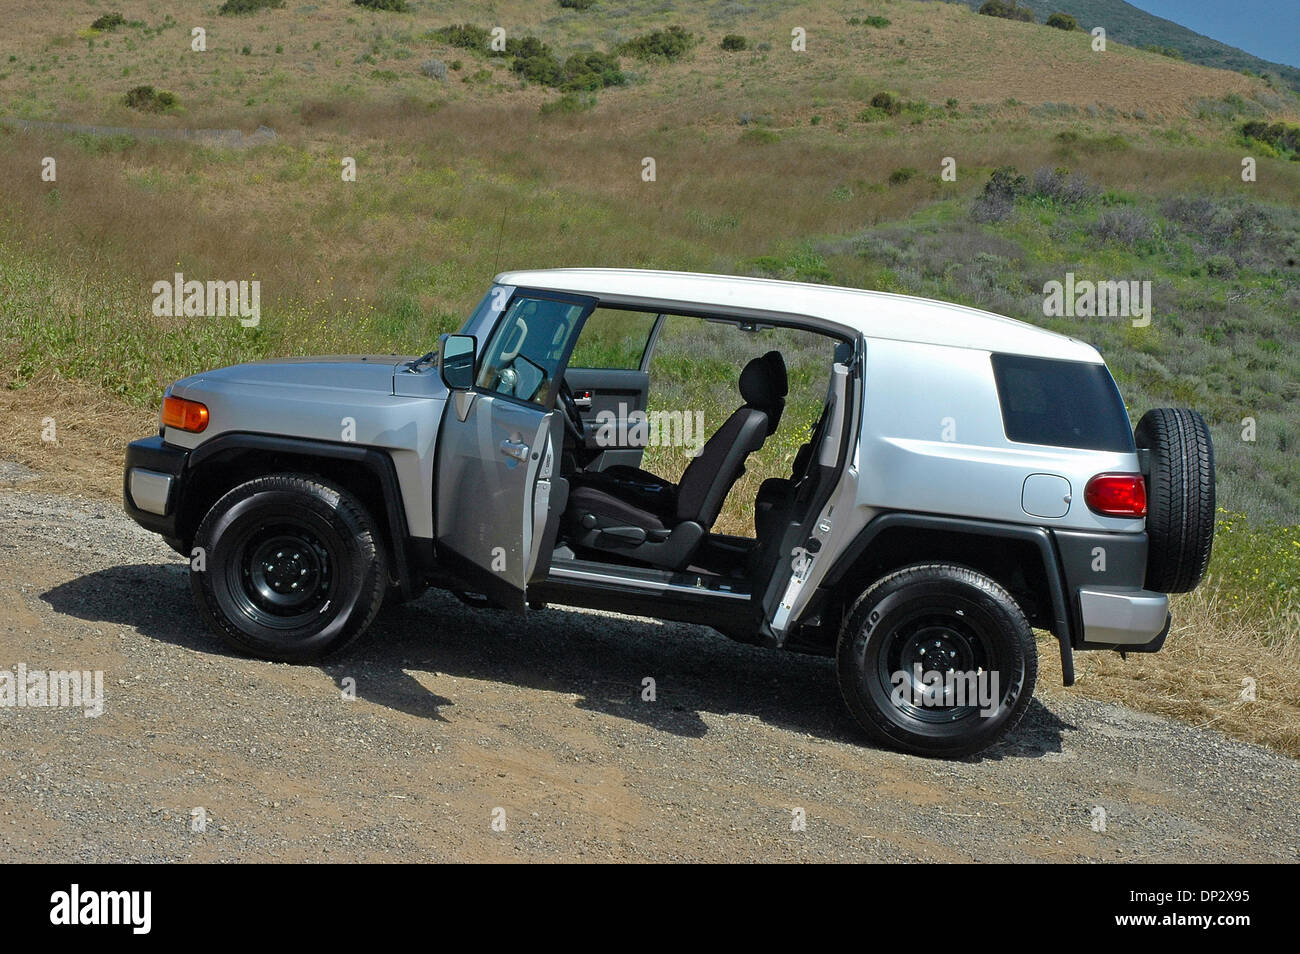 Jun 12, 2006; Los Angeles, CA, USA; 2007 Toyota FJ Cruiser. Prices start at $23,300.00. The FJ Cruiser offers youthful, contemporary styling, is fun to drive, and employs the same state-of-the-art comfort, power, economy, safety and convenience found in the Toyota Land Cruiser four-door sport utility. The FJ Cruiser takes it styling cues from the famous Toyota FJ40 4X4 utility vehi Stock Photo